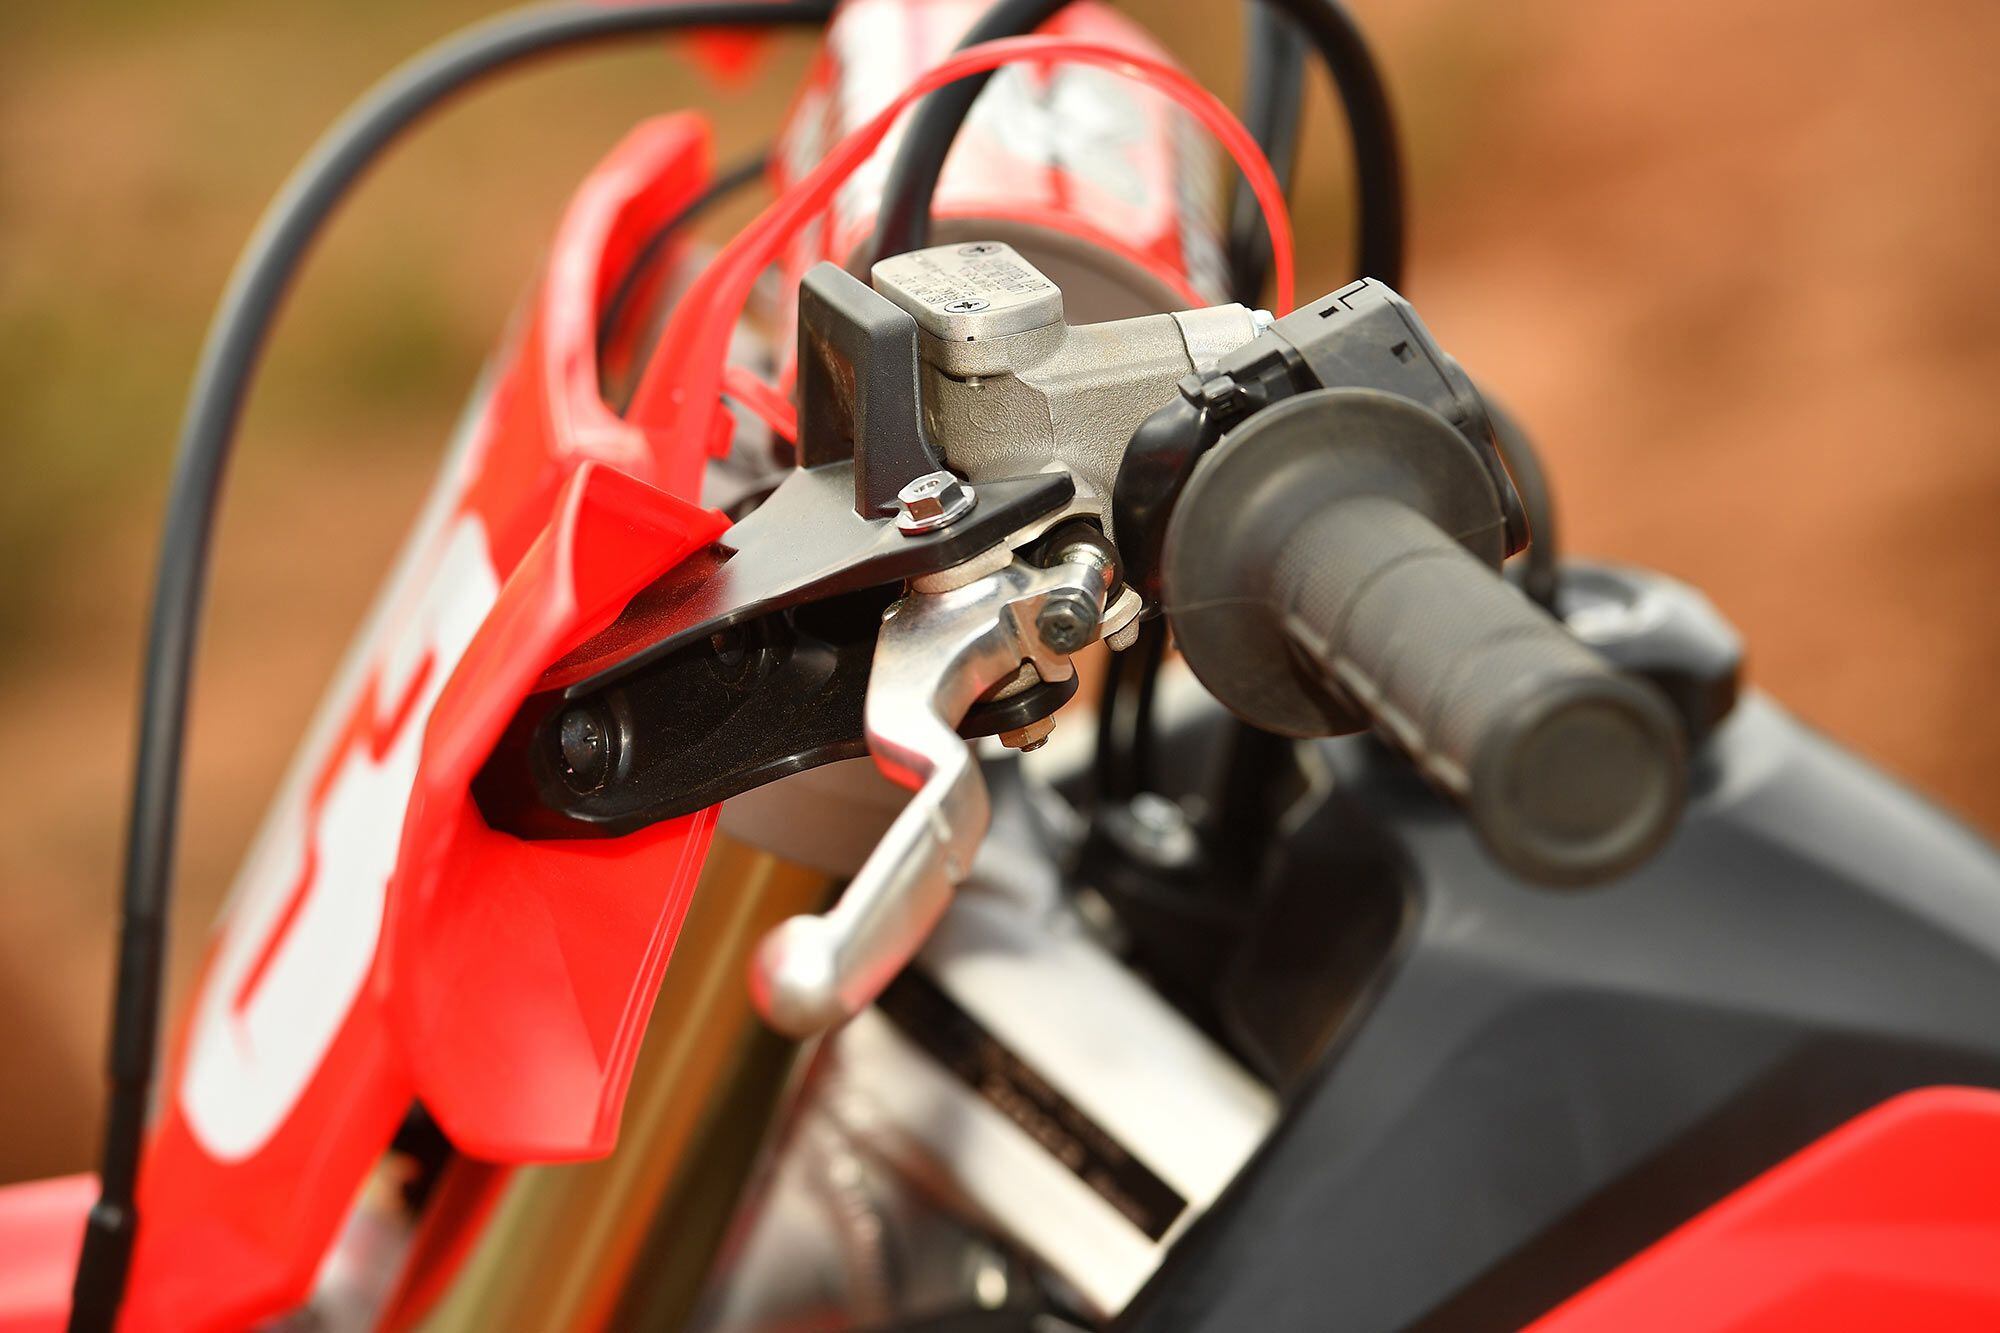 Honda’s standard-equipment hand guards work quite well. Utilizing the clutch and front brake lever bolts, no handlebar space is impacted. If any CRF owners who run Renthal Twinwall handlebars are interested in saving precious bar space, the RX guards and accompanying bolt hardware fit right on the CRF250R and CRF450R models as well.